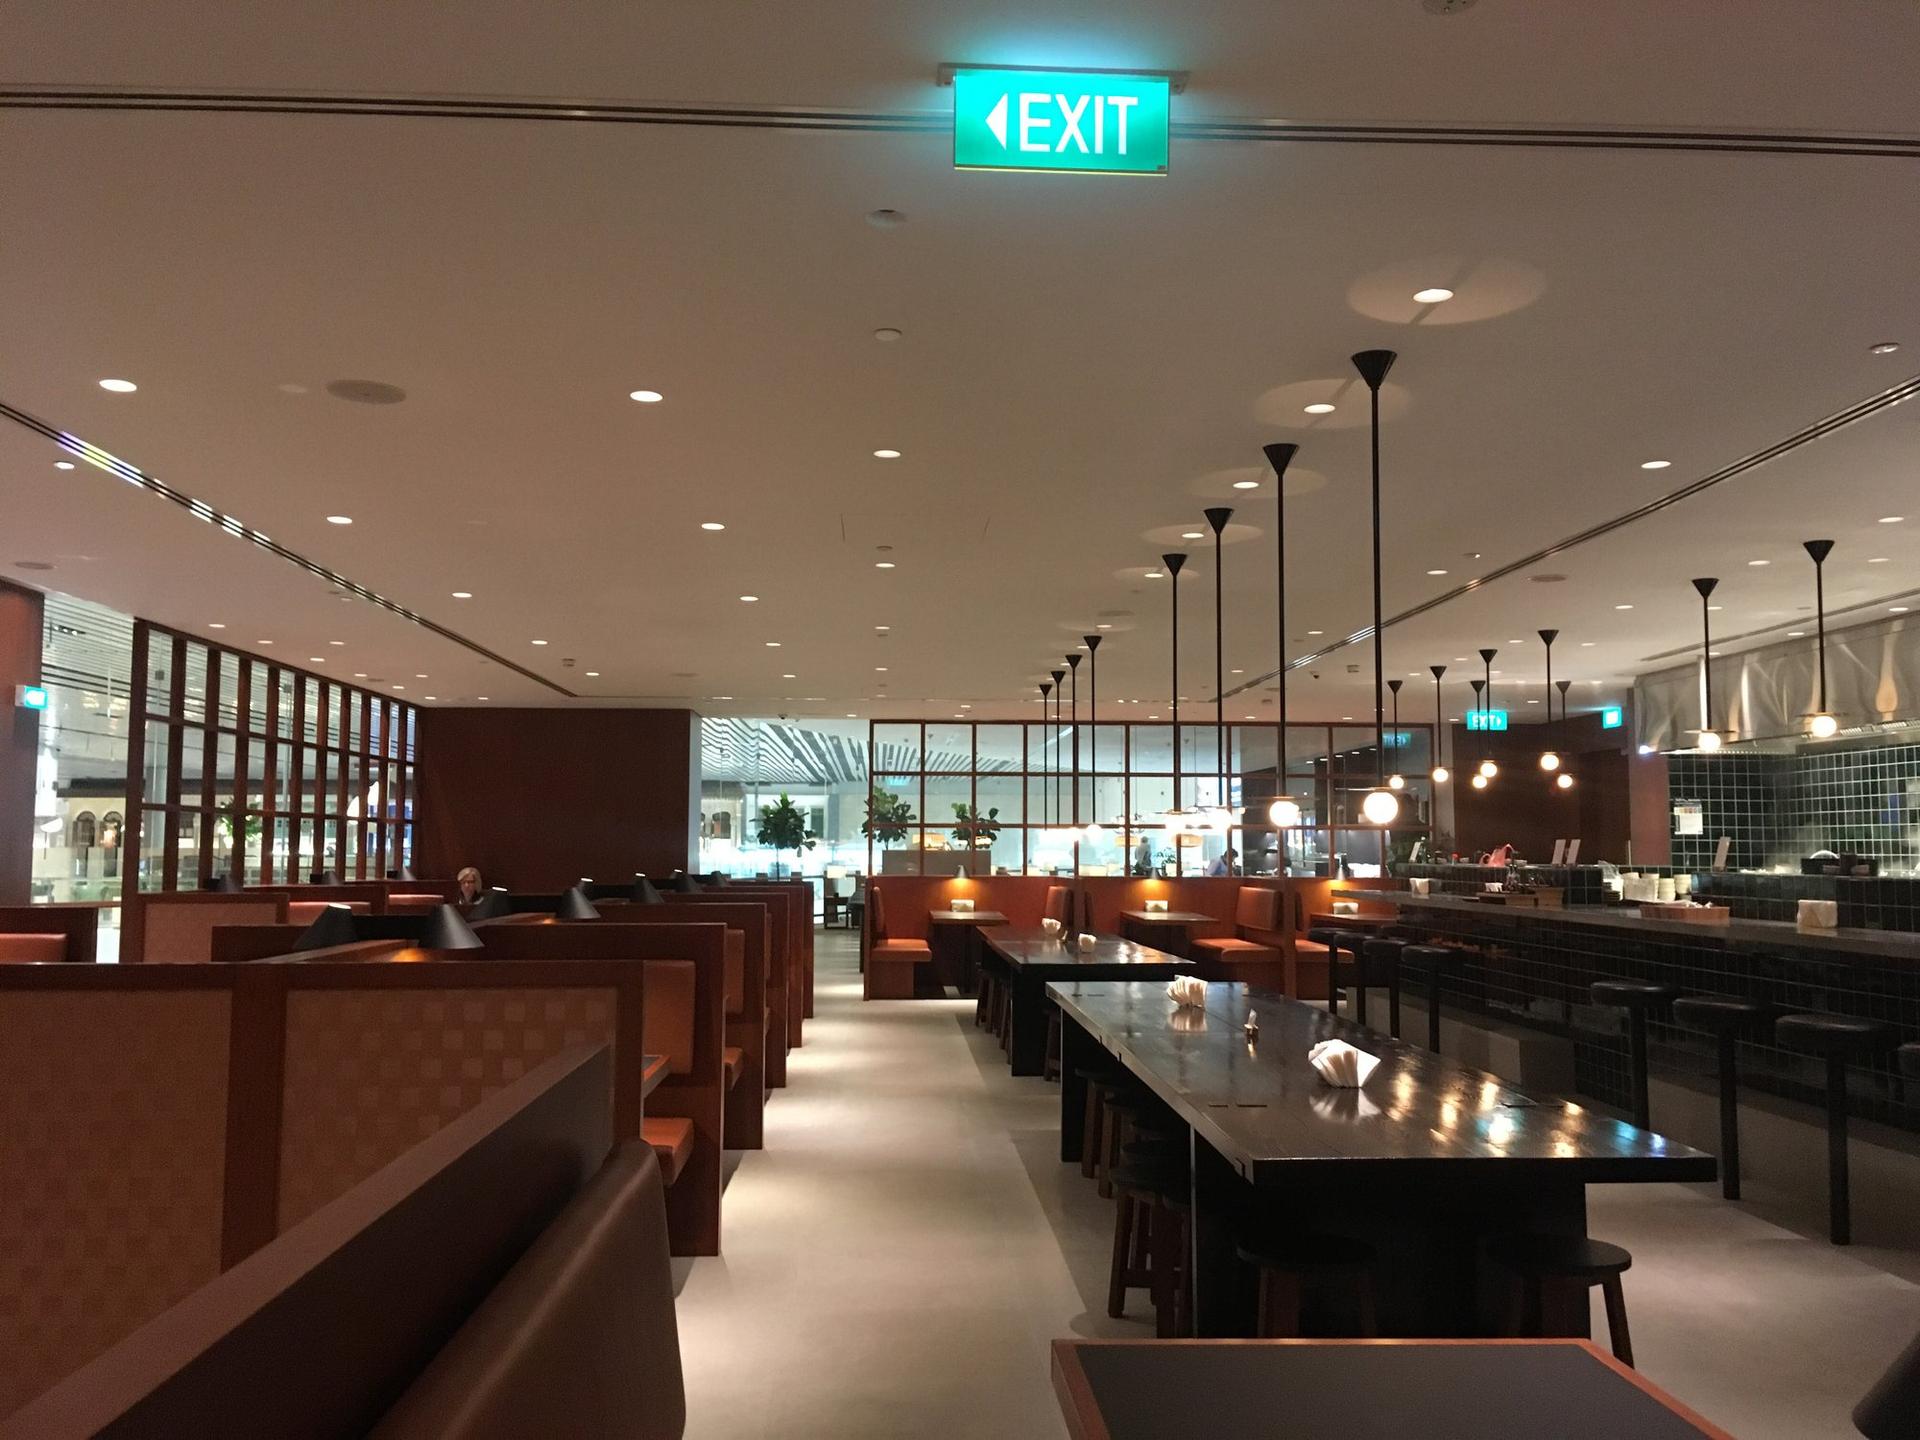 Cathay Pacific Lounge image 17 of 60